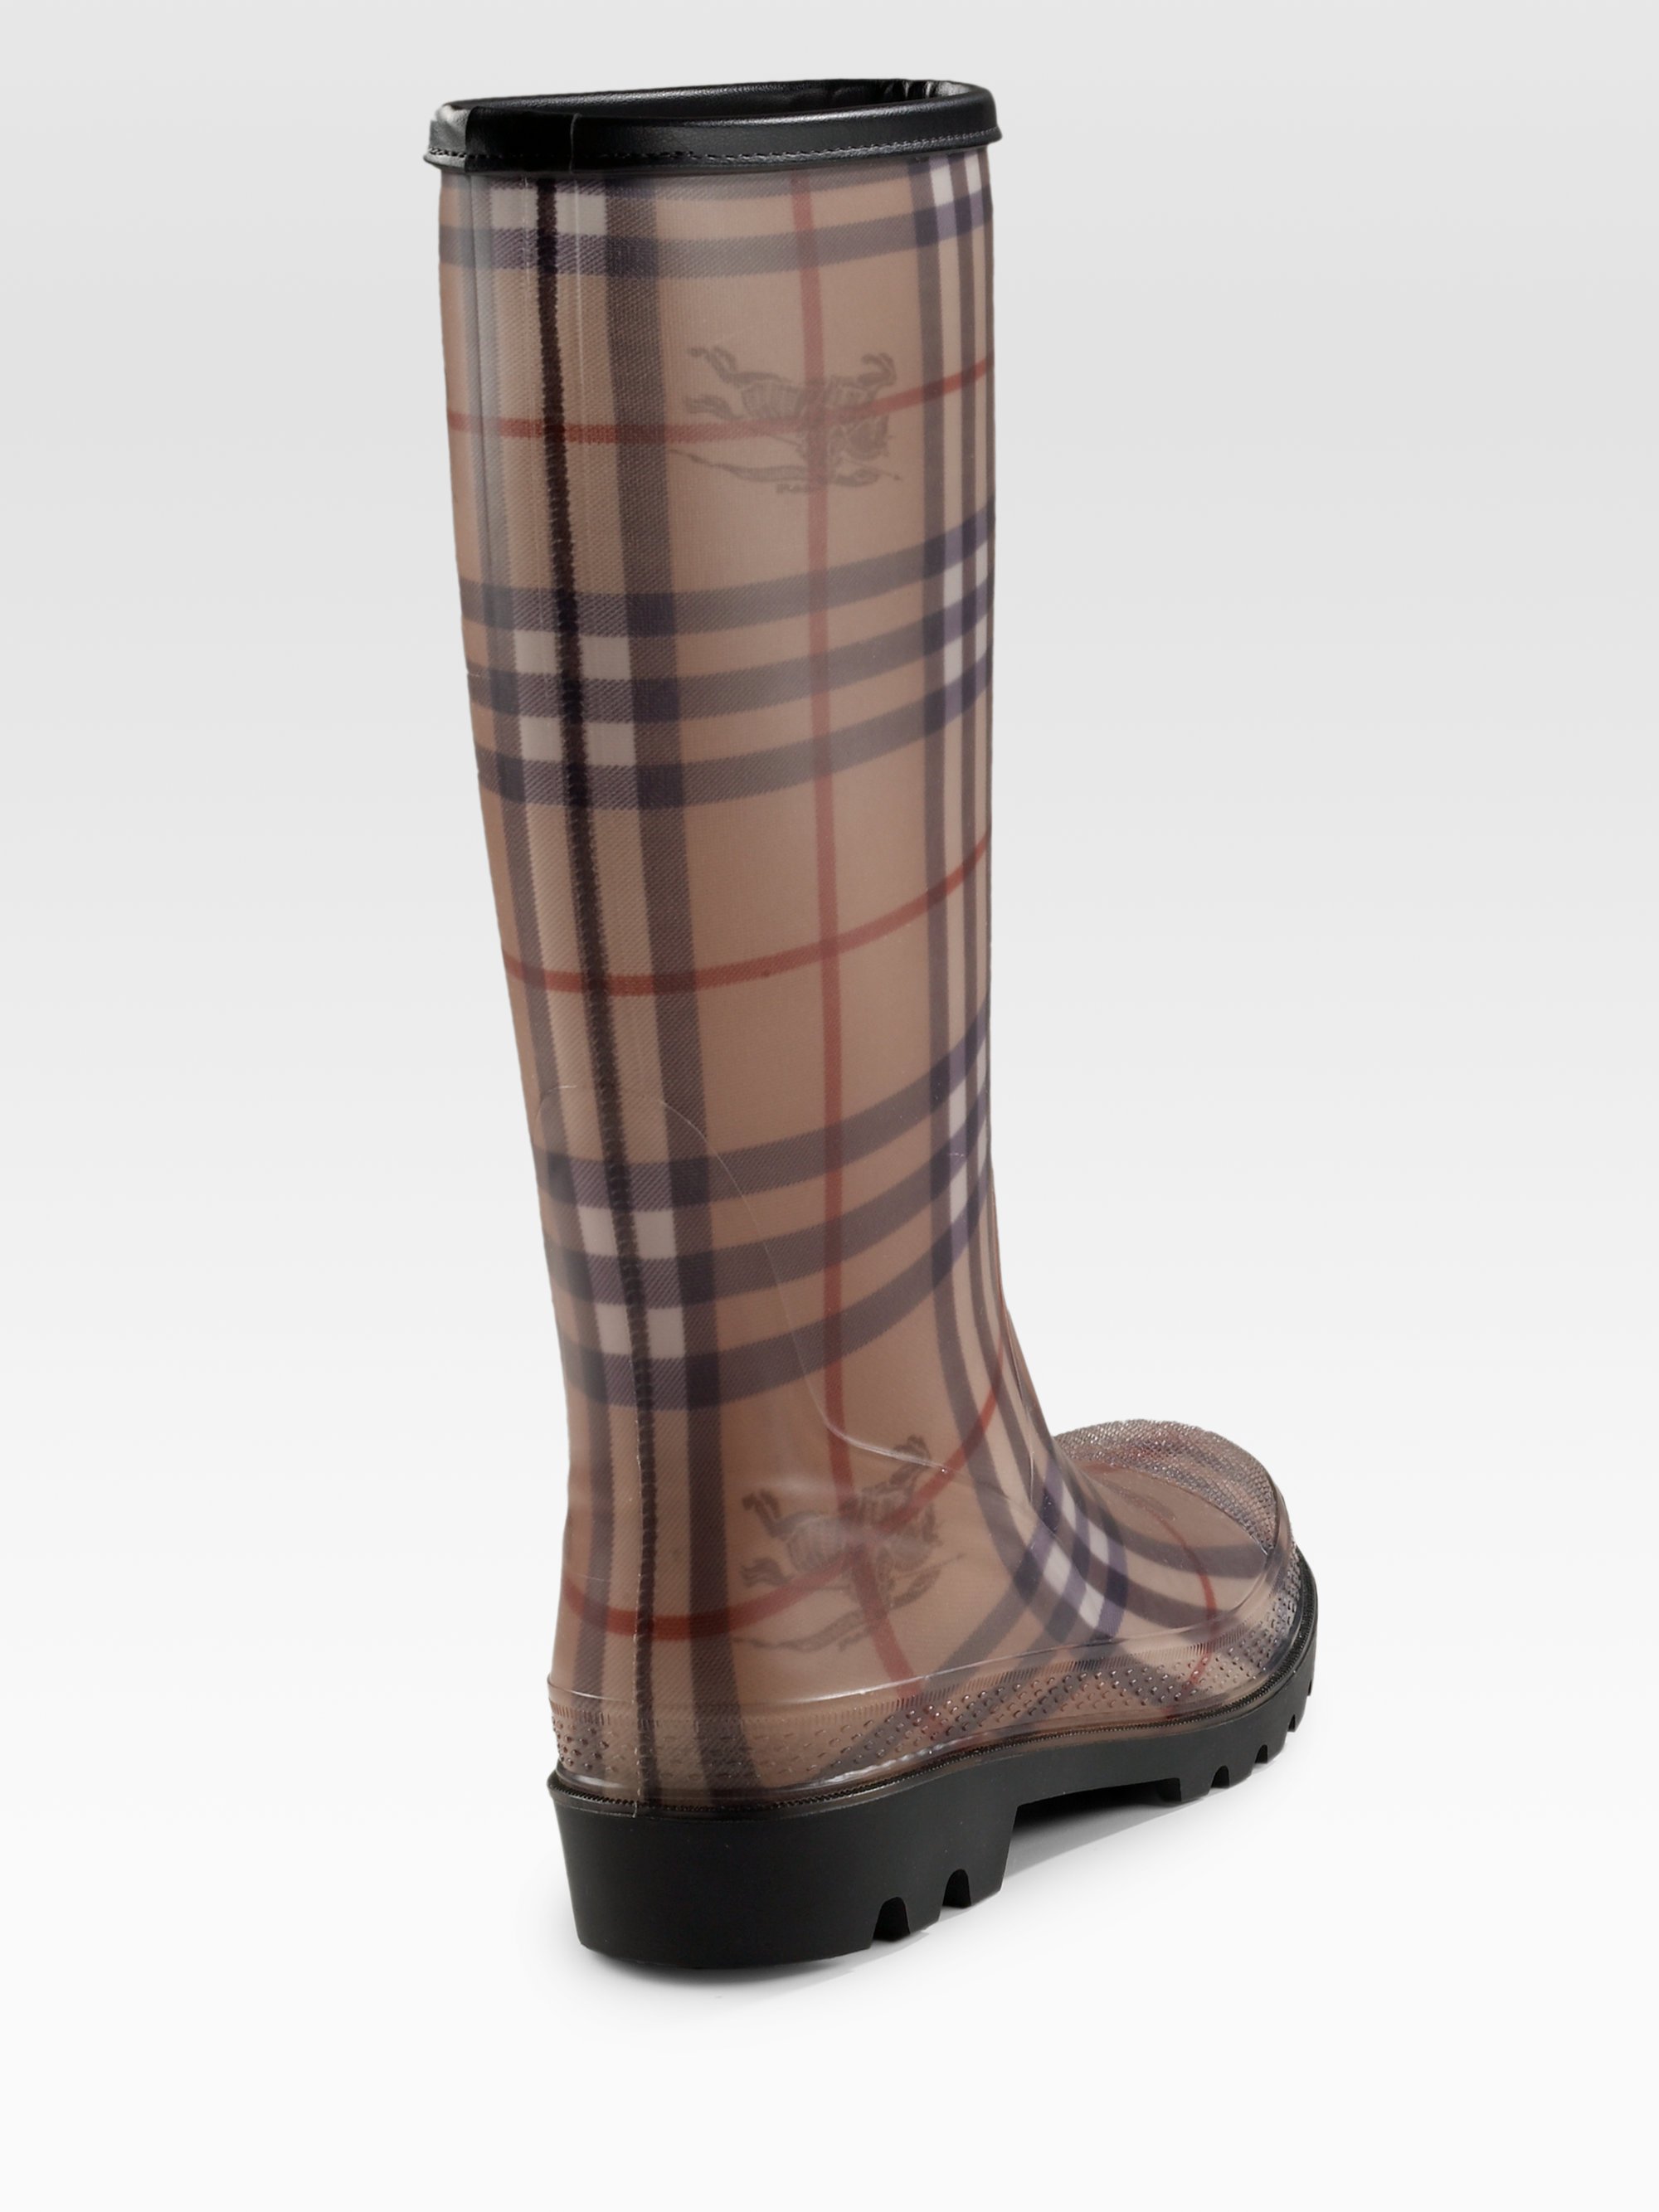 Burberry Classic Check Rain Boots in Brown | Lyst